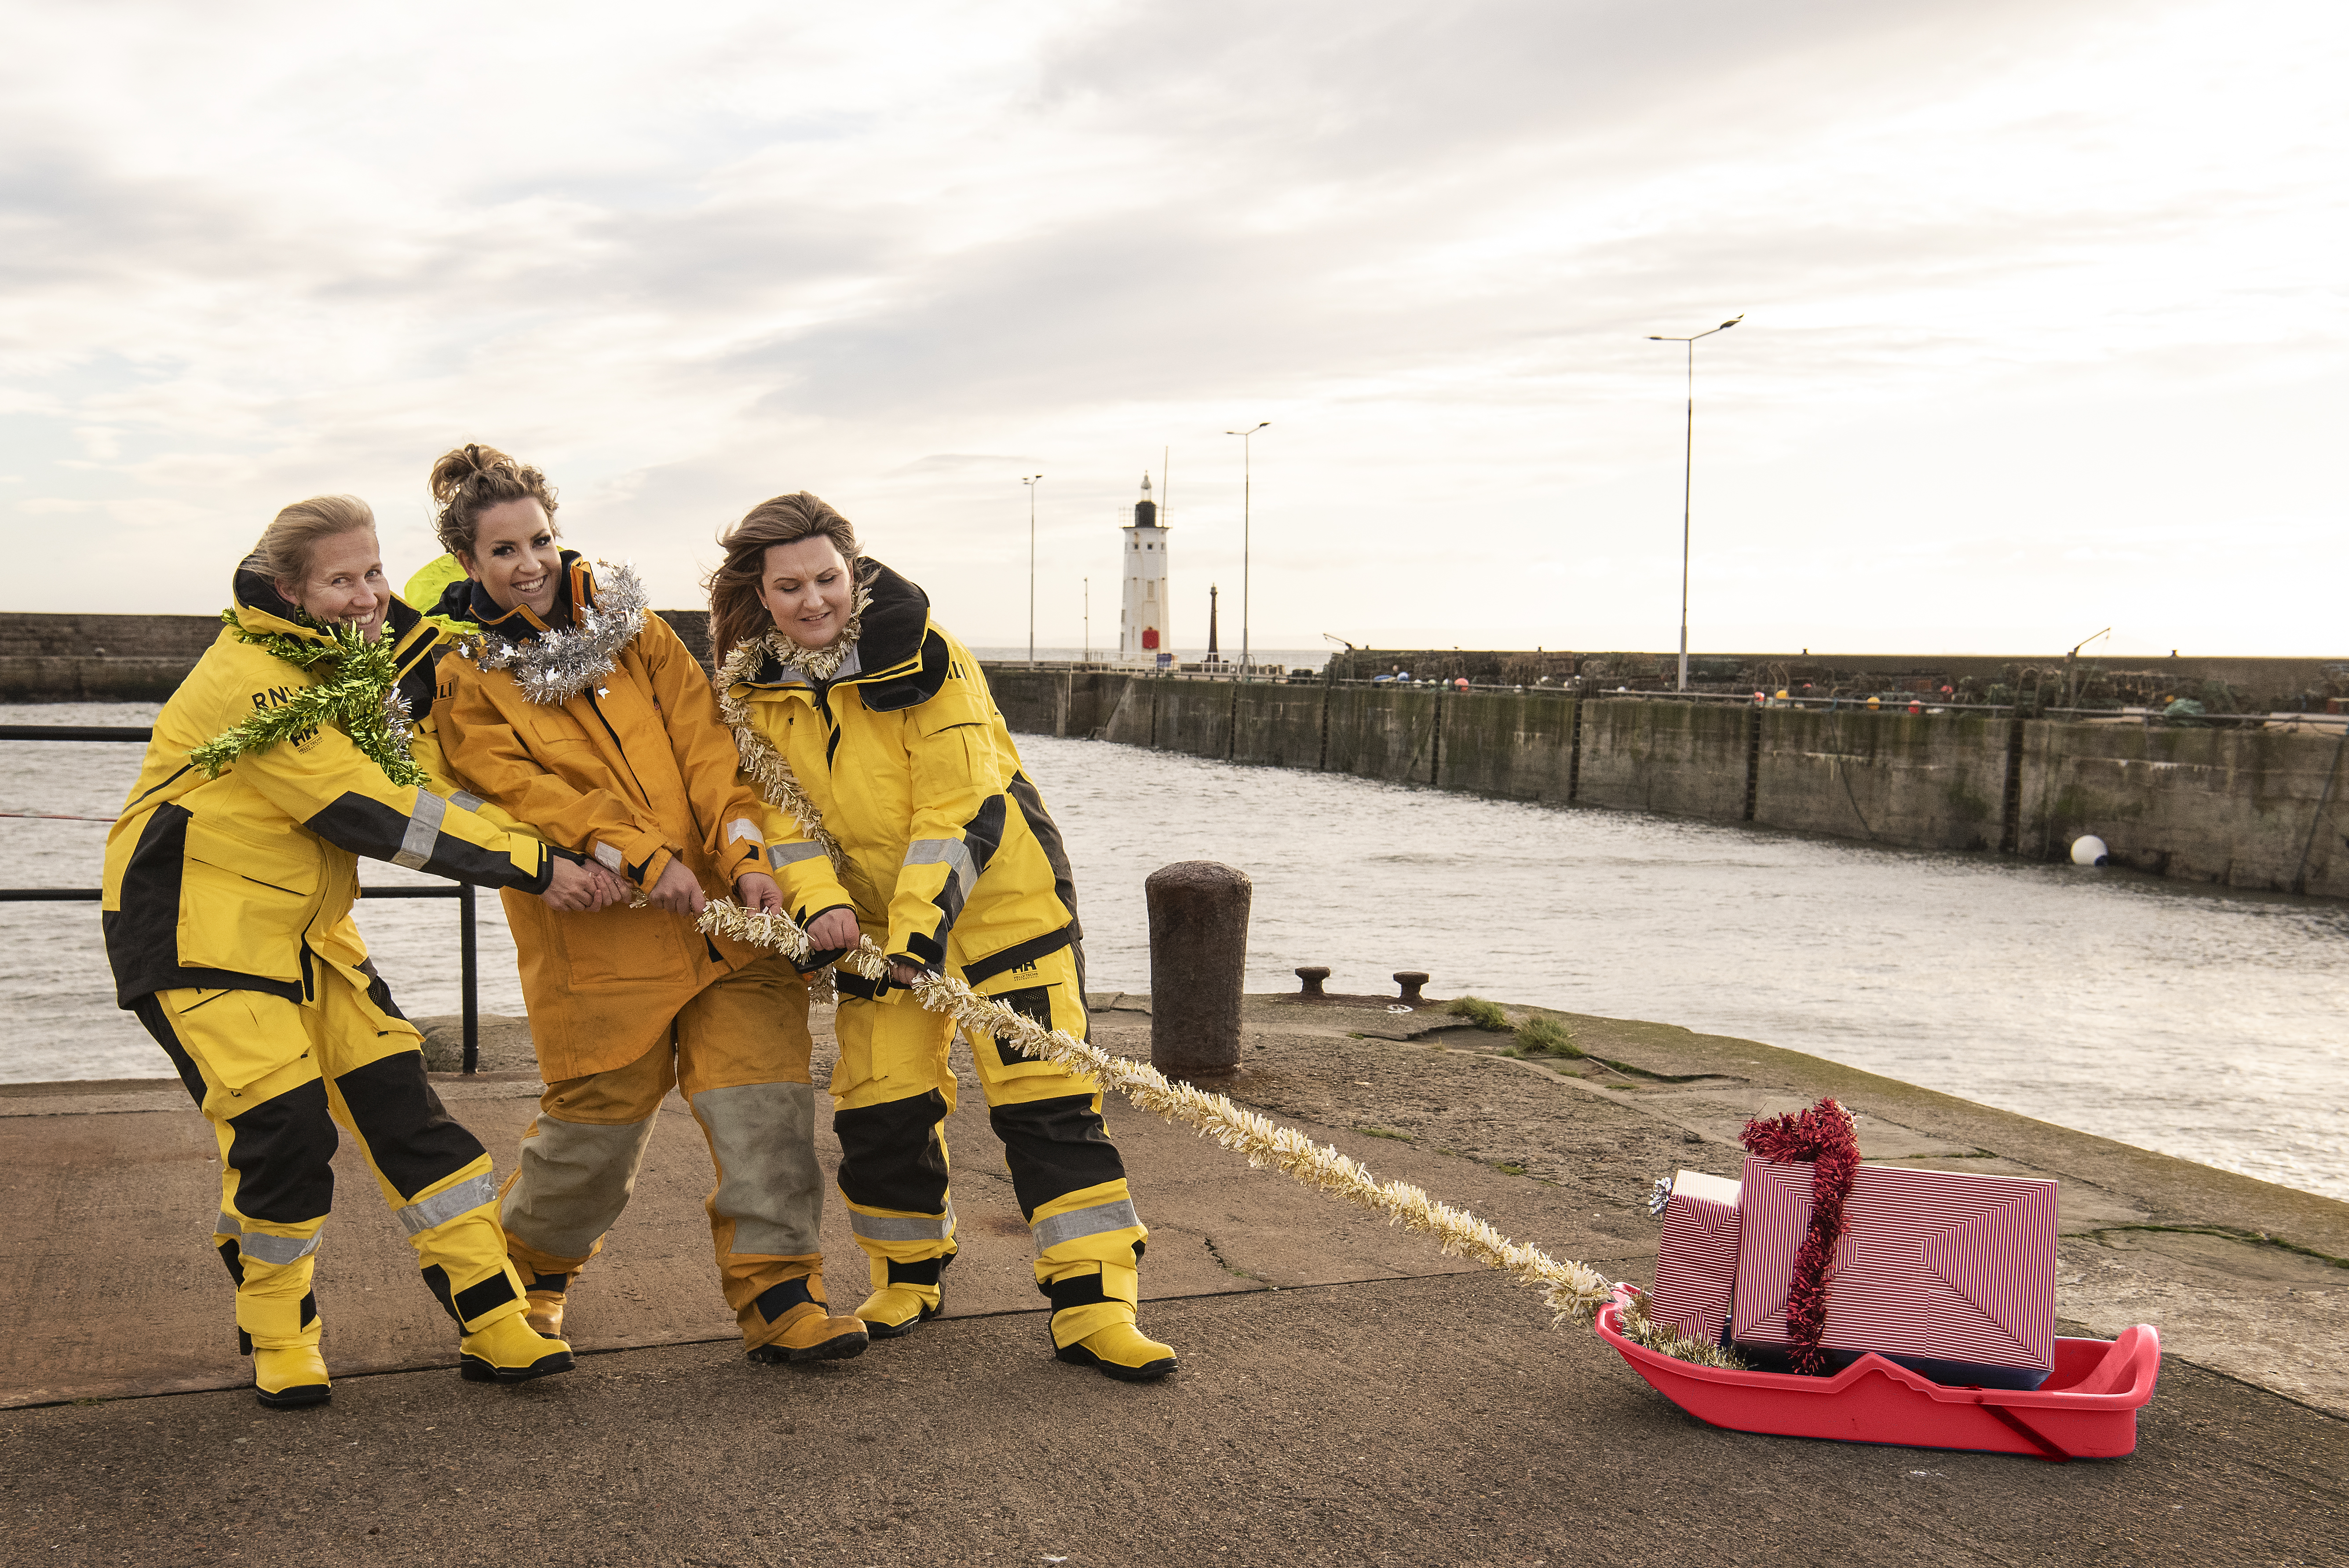 Anstruther RNLI's Christmas countdown.
Pictures by Audrey Peddie